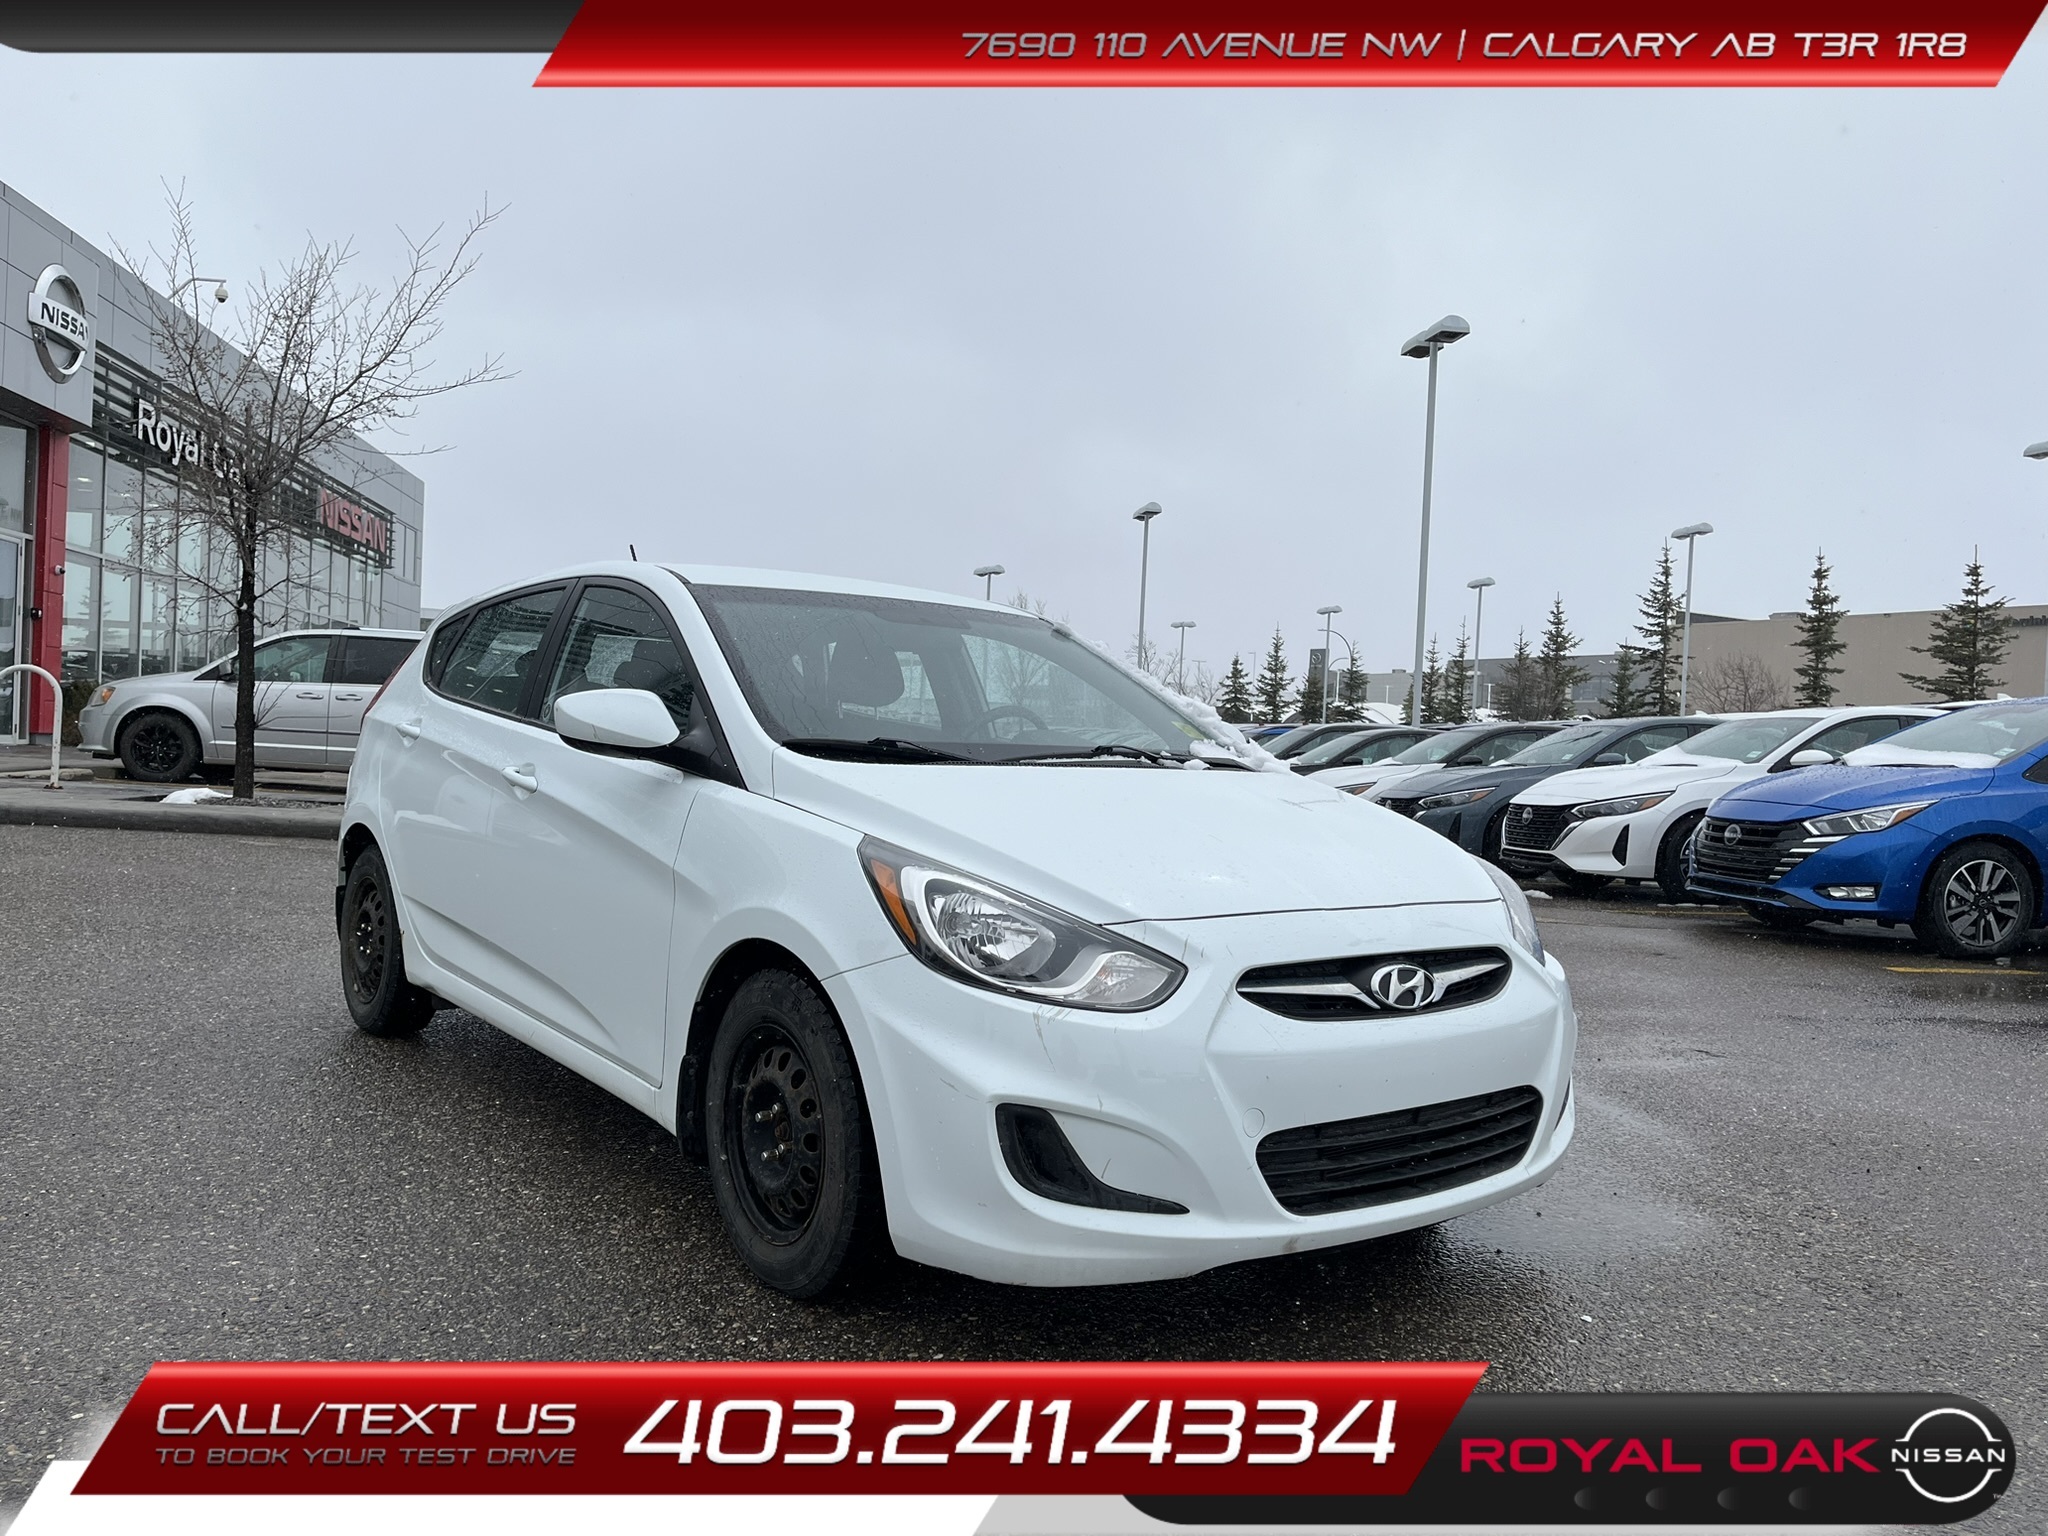 2014 Hyundai Accent 5dr HB GL - Low KM's / Automatic 